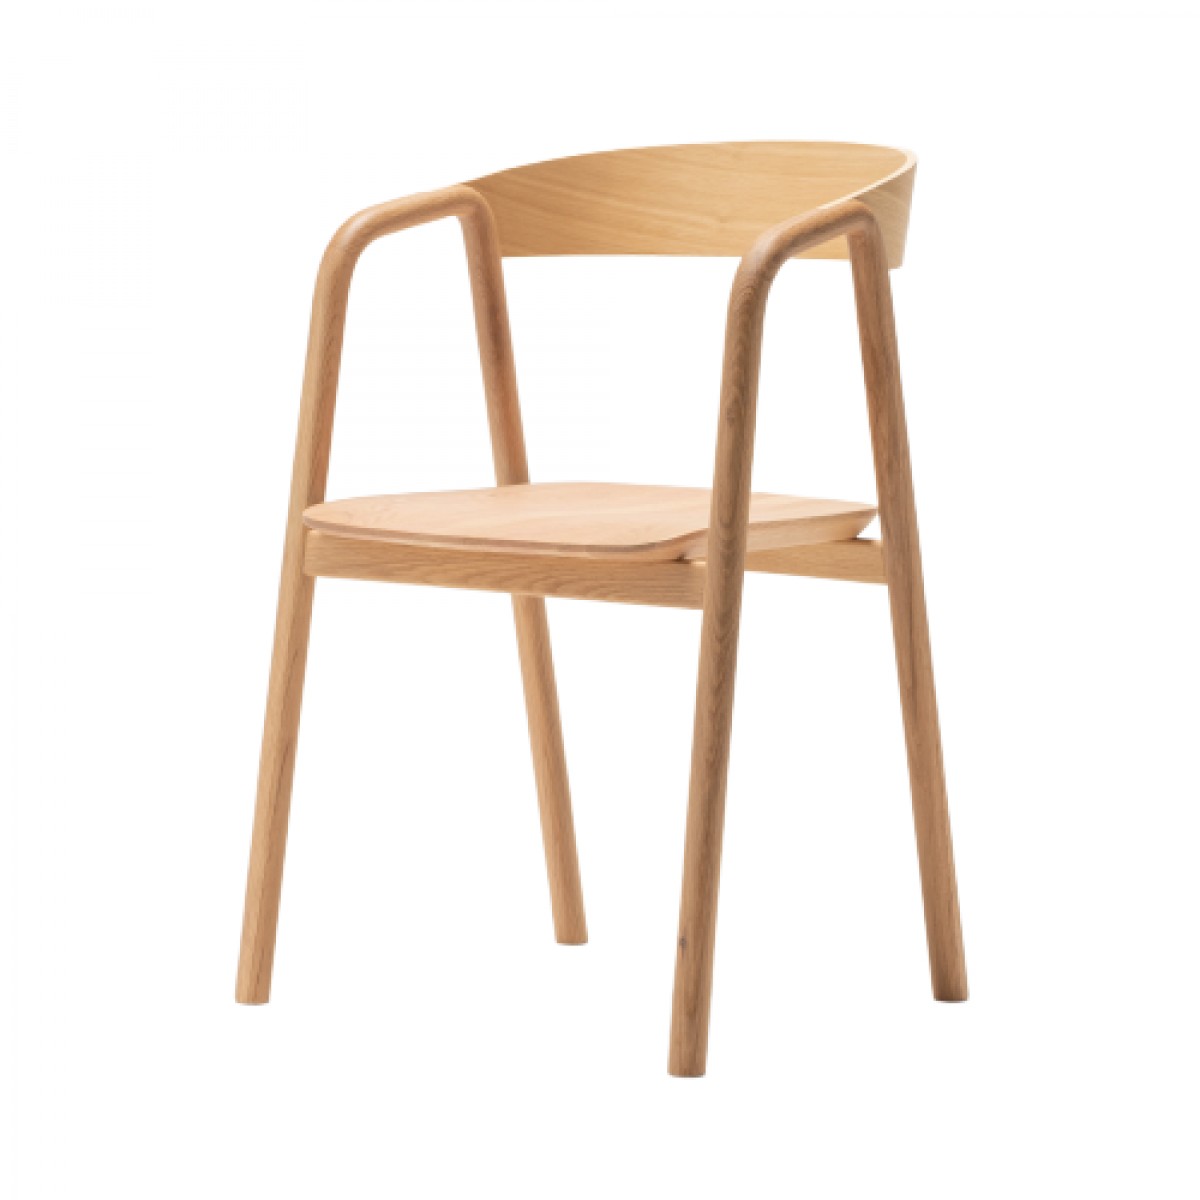 Inlay Chair - Wooden Seat